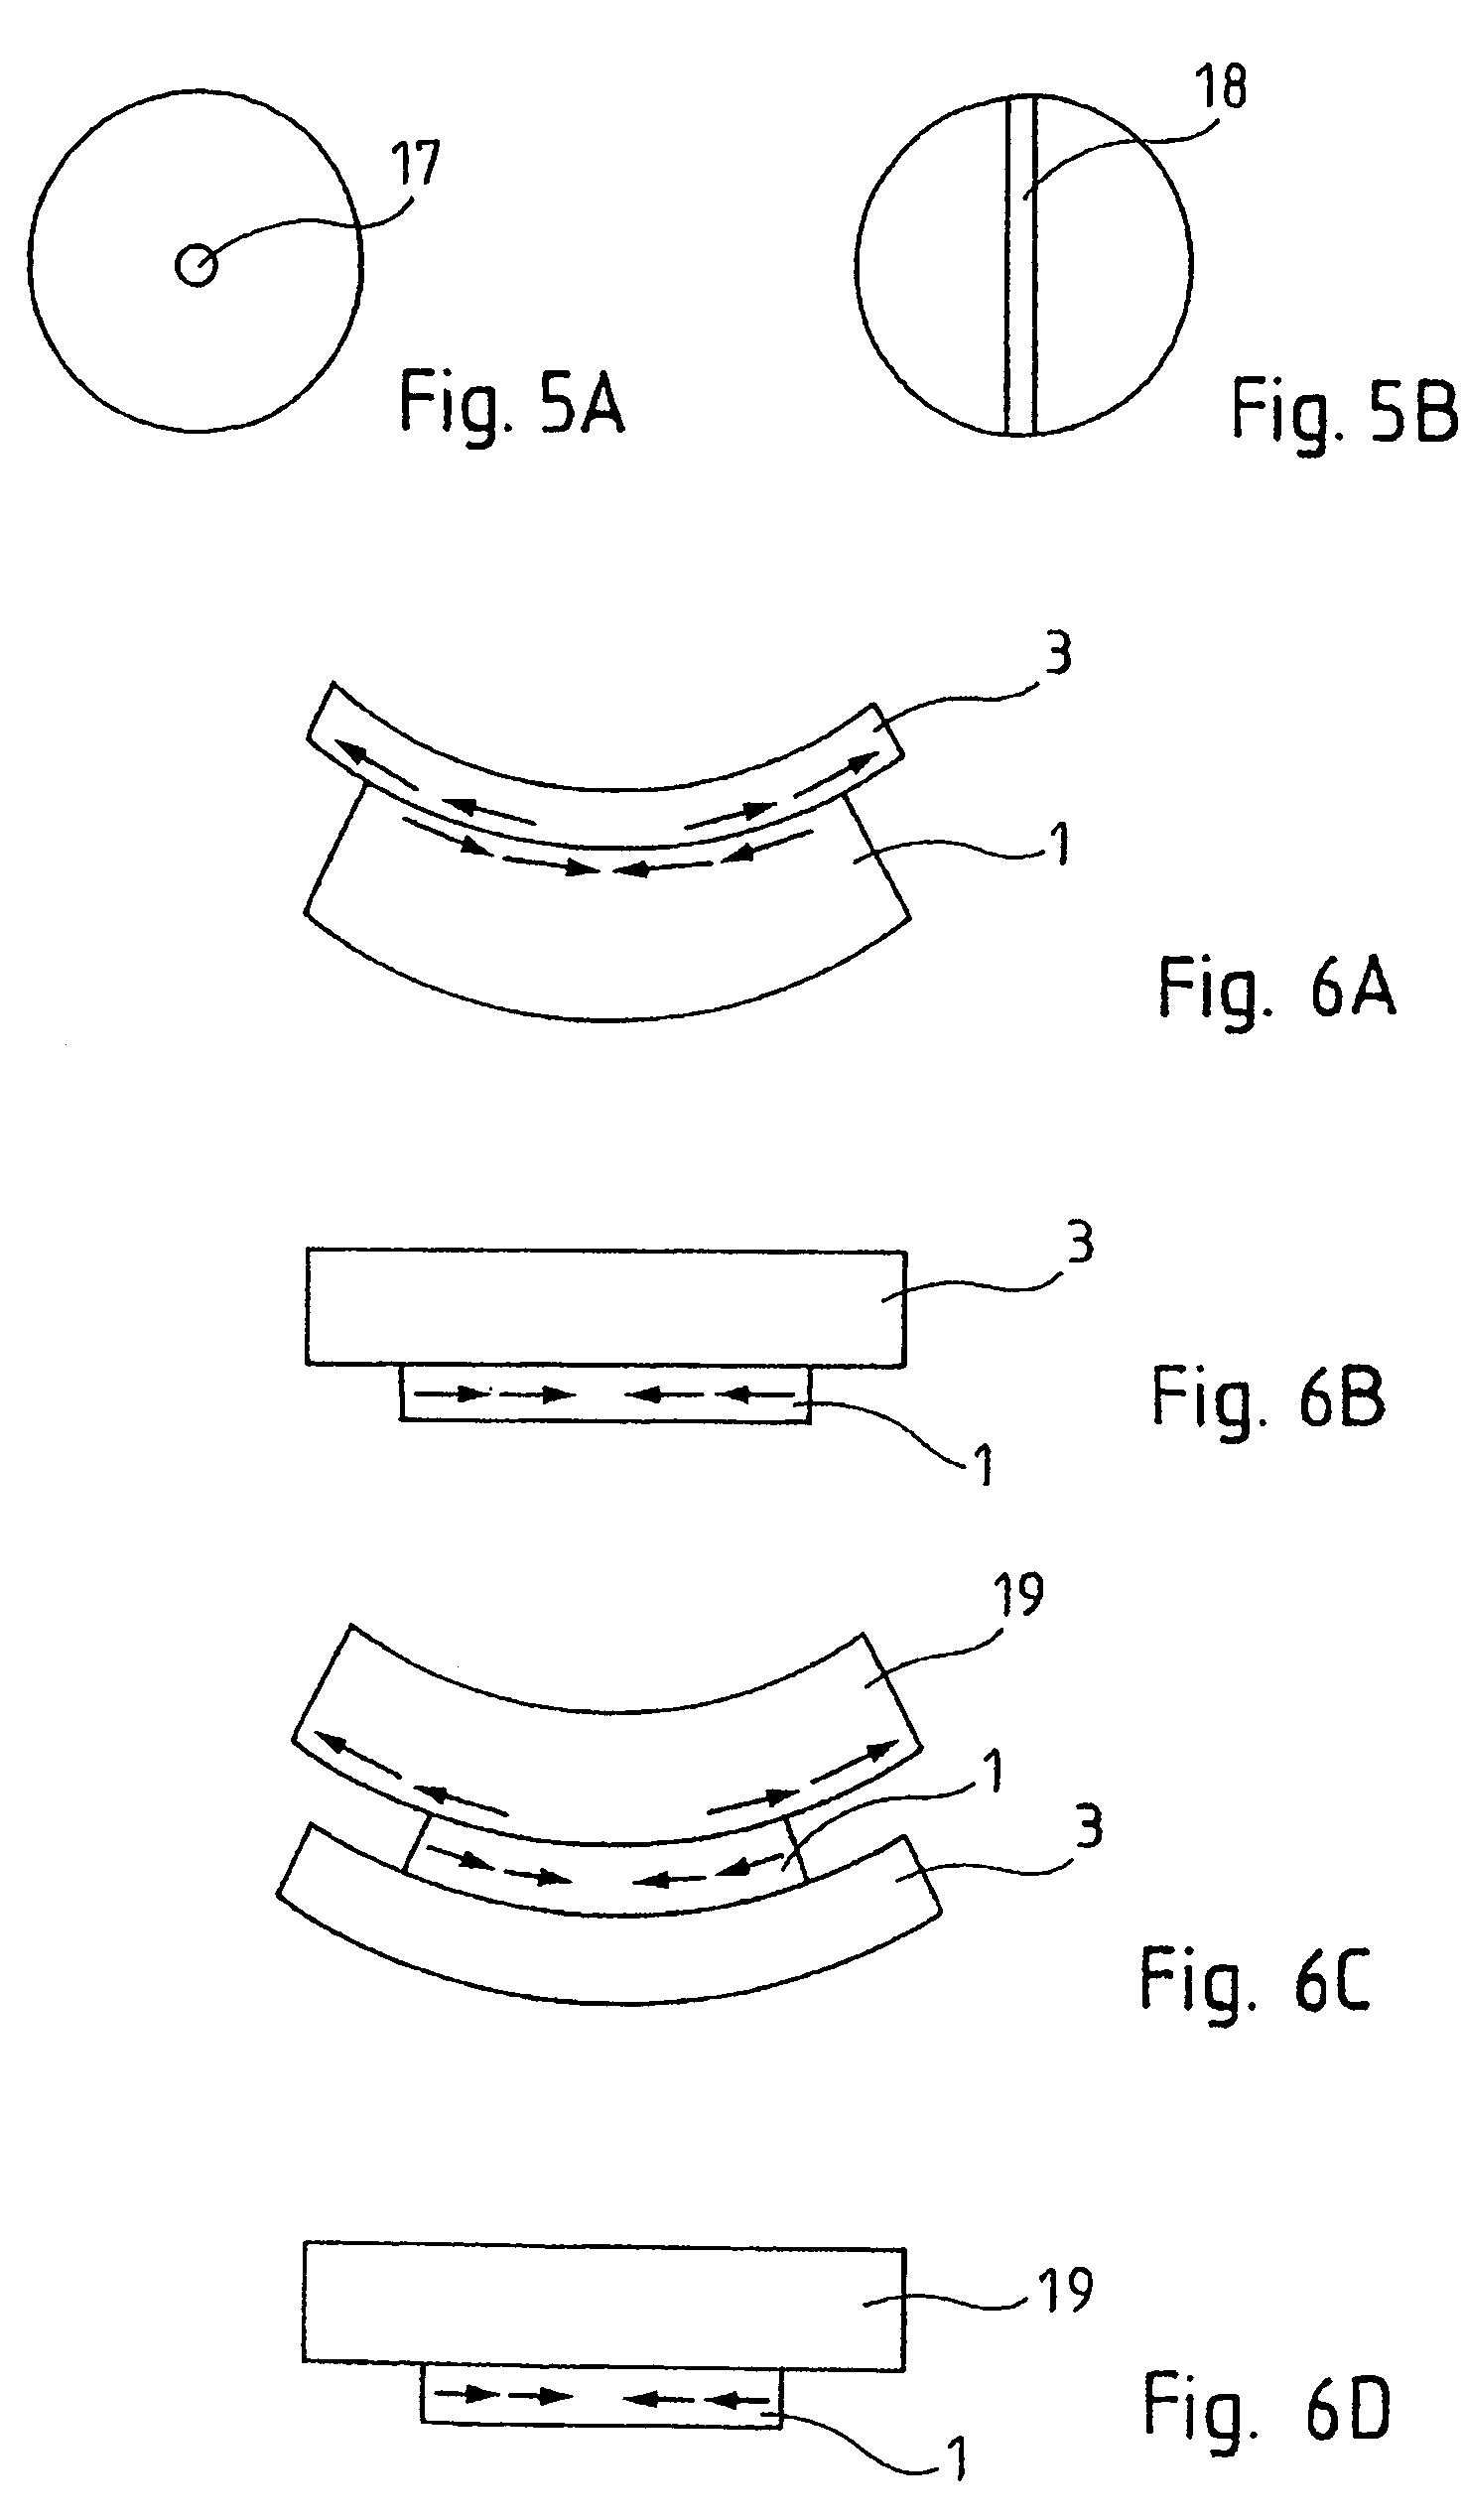 Method of producing a complex structure by assembling stressed structures